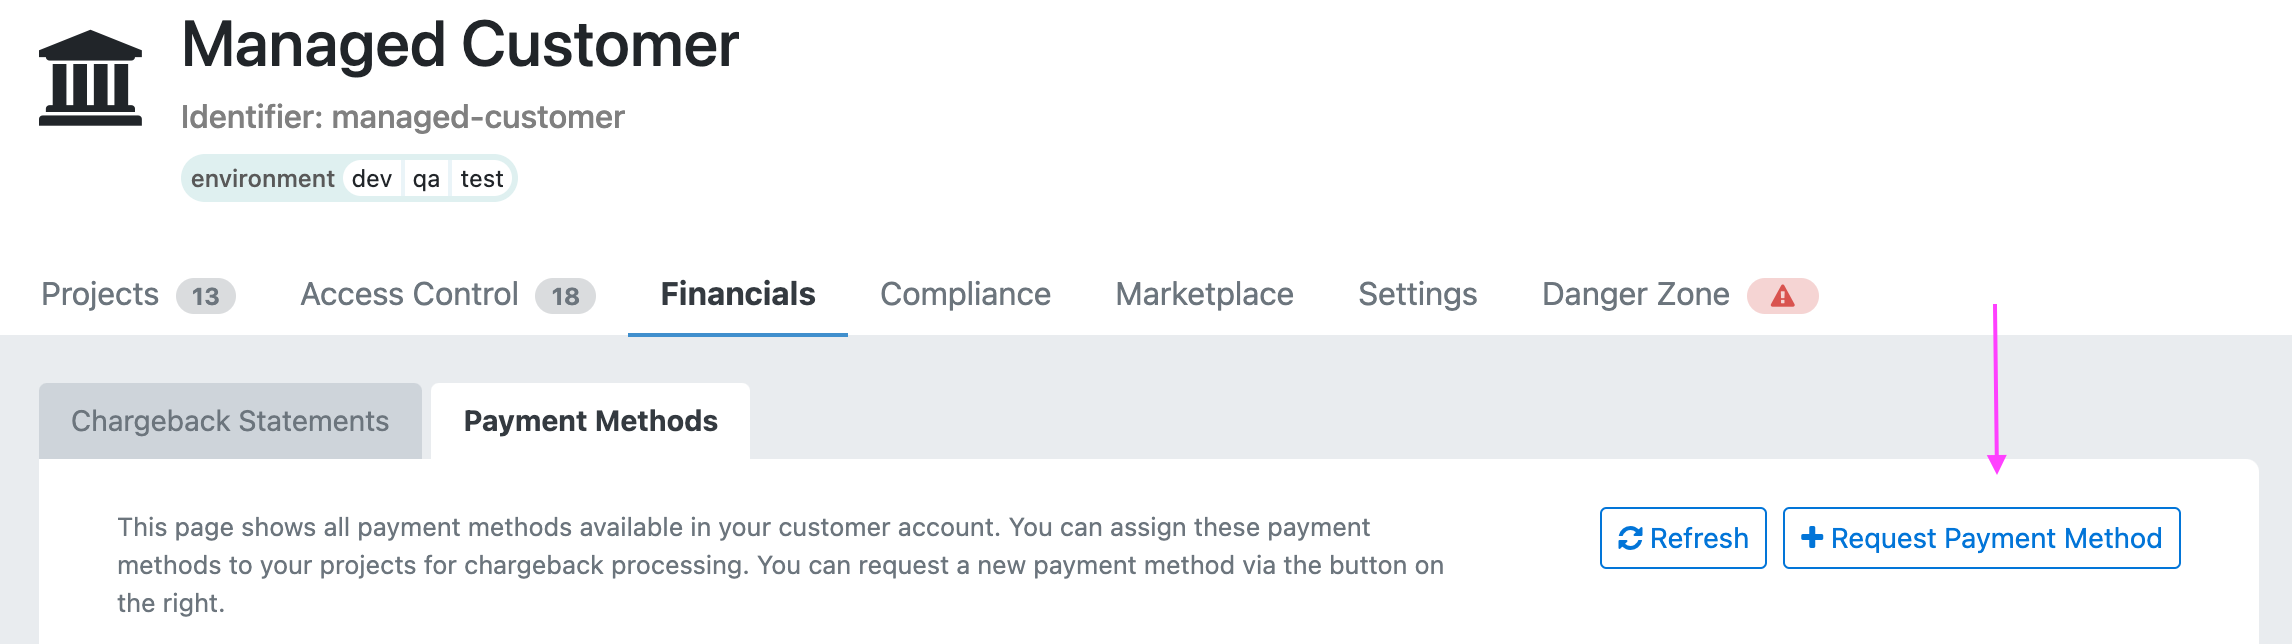 Request Payment Method Button